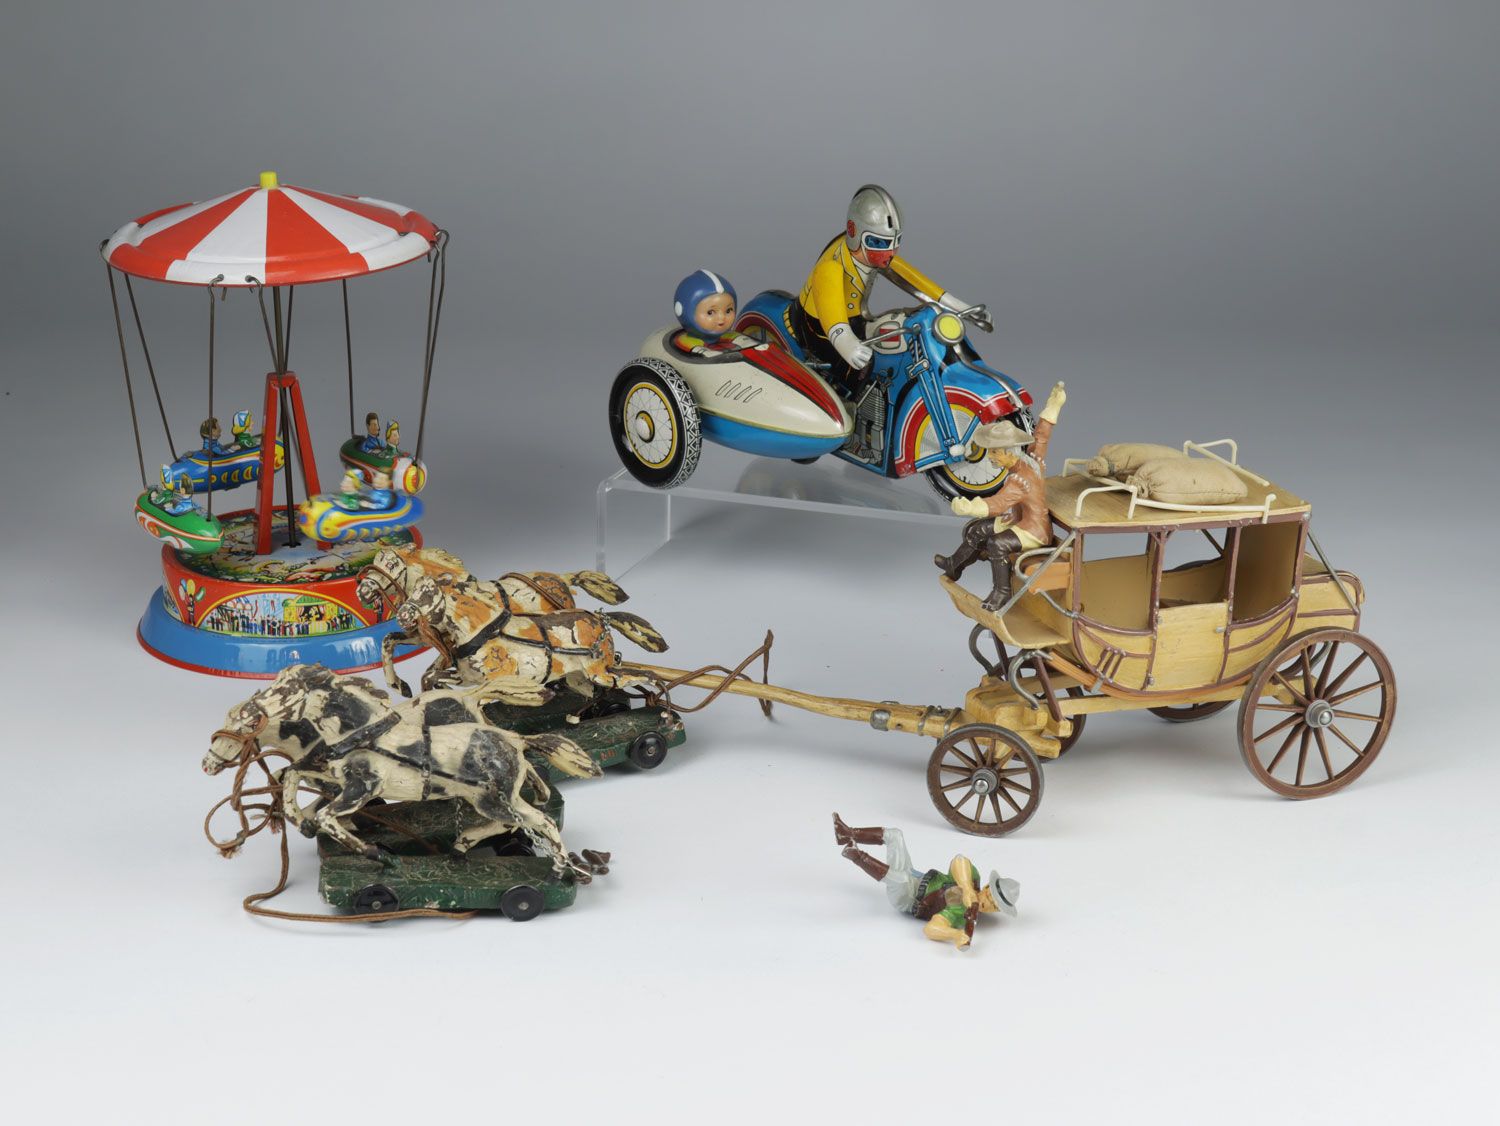 Null tin toy, etc. - 1 motorcycle with sidecar, tin, unmarked, polychrome printe&hellip;